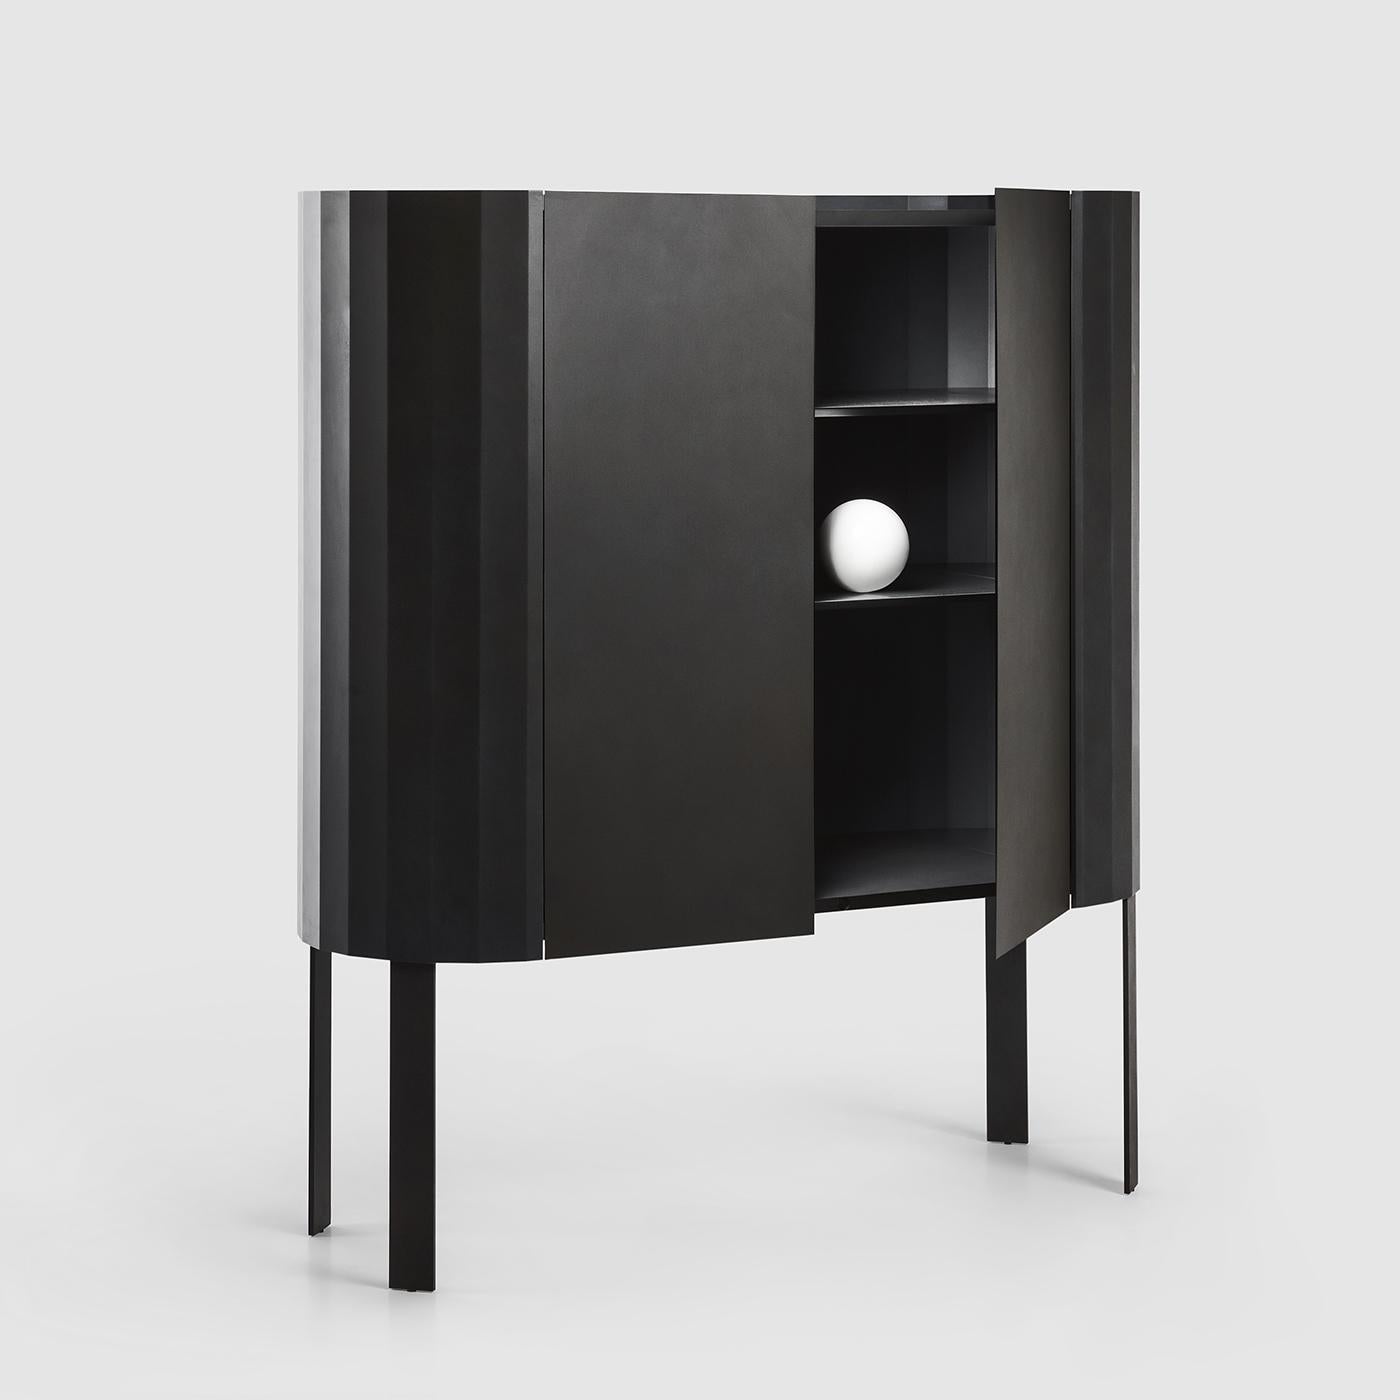 A splendid piece of modern flair, this sideboard boasts a total black look that will infuse any room with subtle sophistication. Crafted of steel, it features two doors and two inner shelves enriched with an MDF core. Externally, the piece is marked